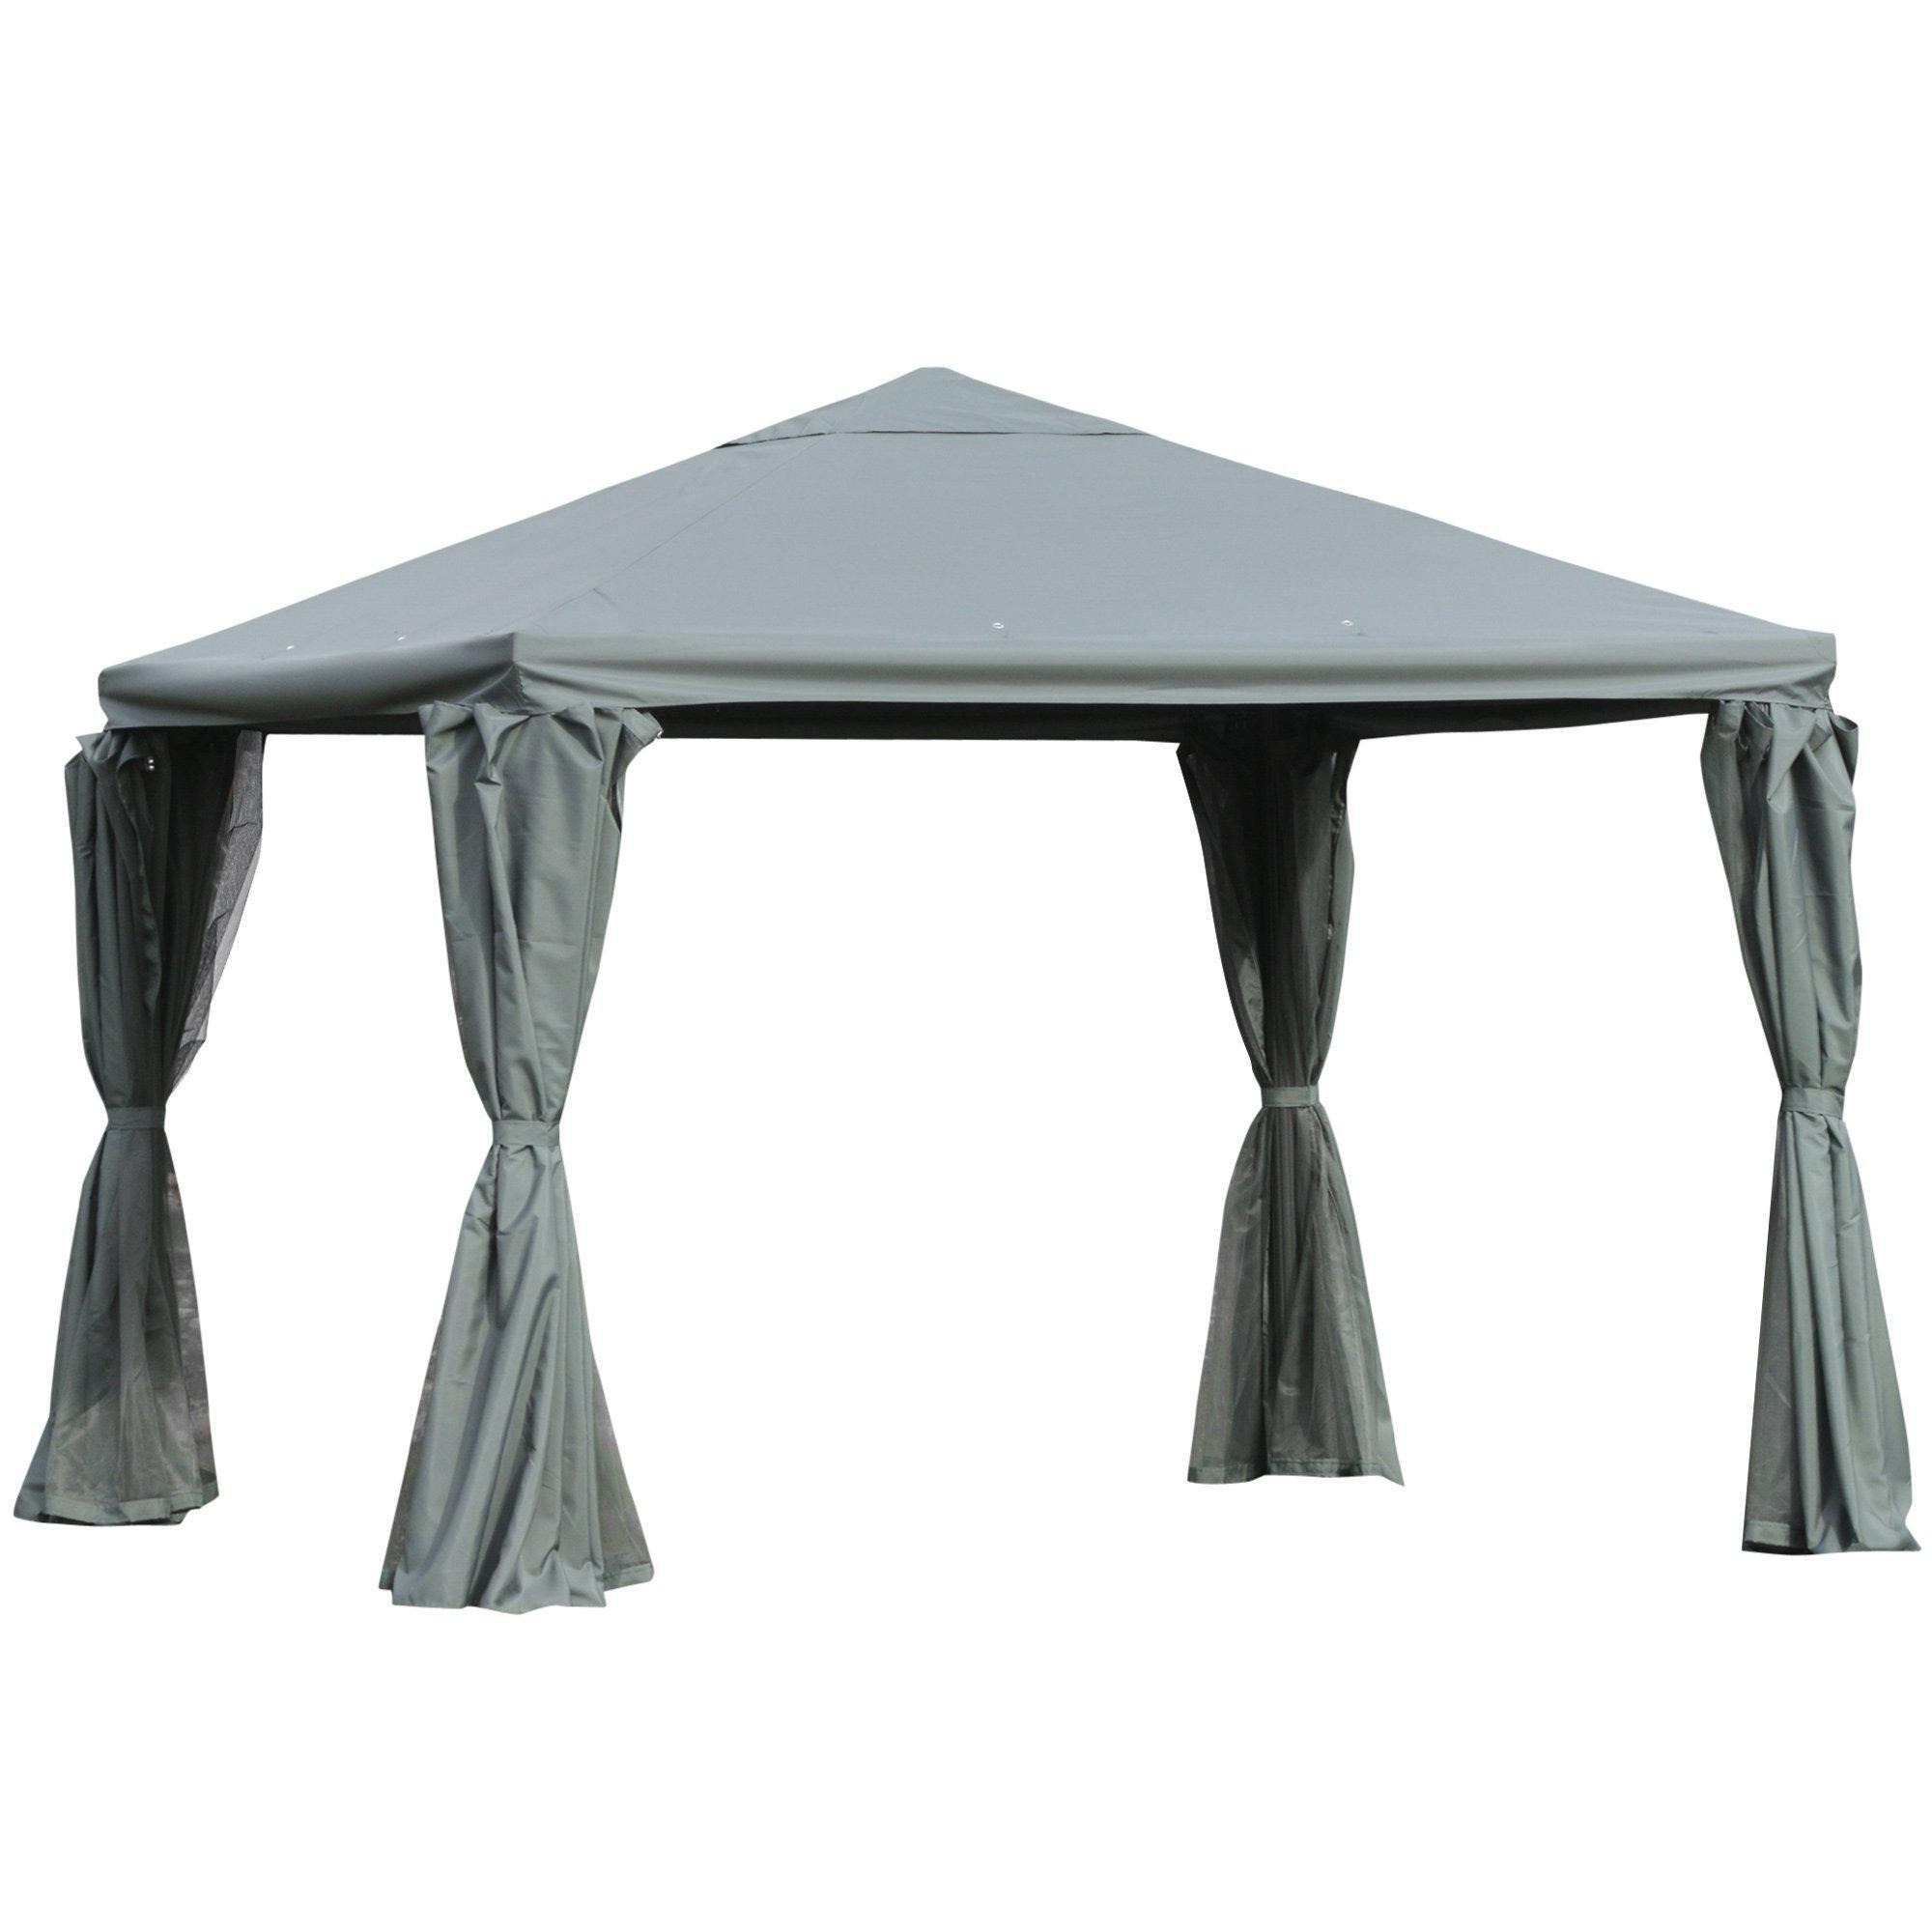 3Metre Outdoor Gazebo Canopy Party Tent Aluminum Frame with Sidewalls - image 1